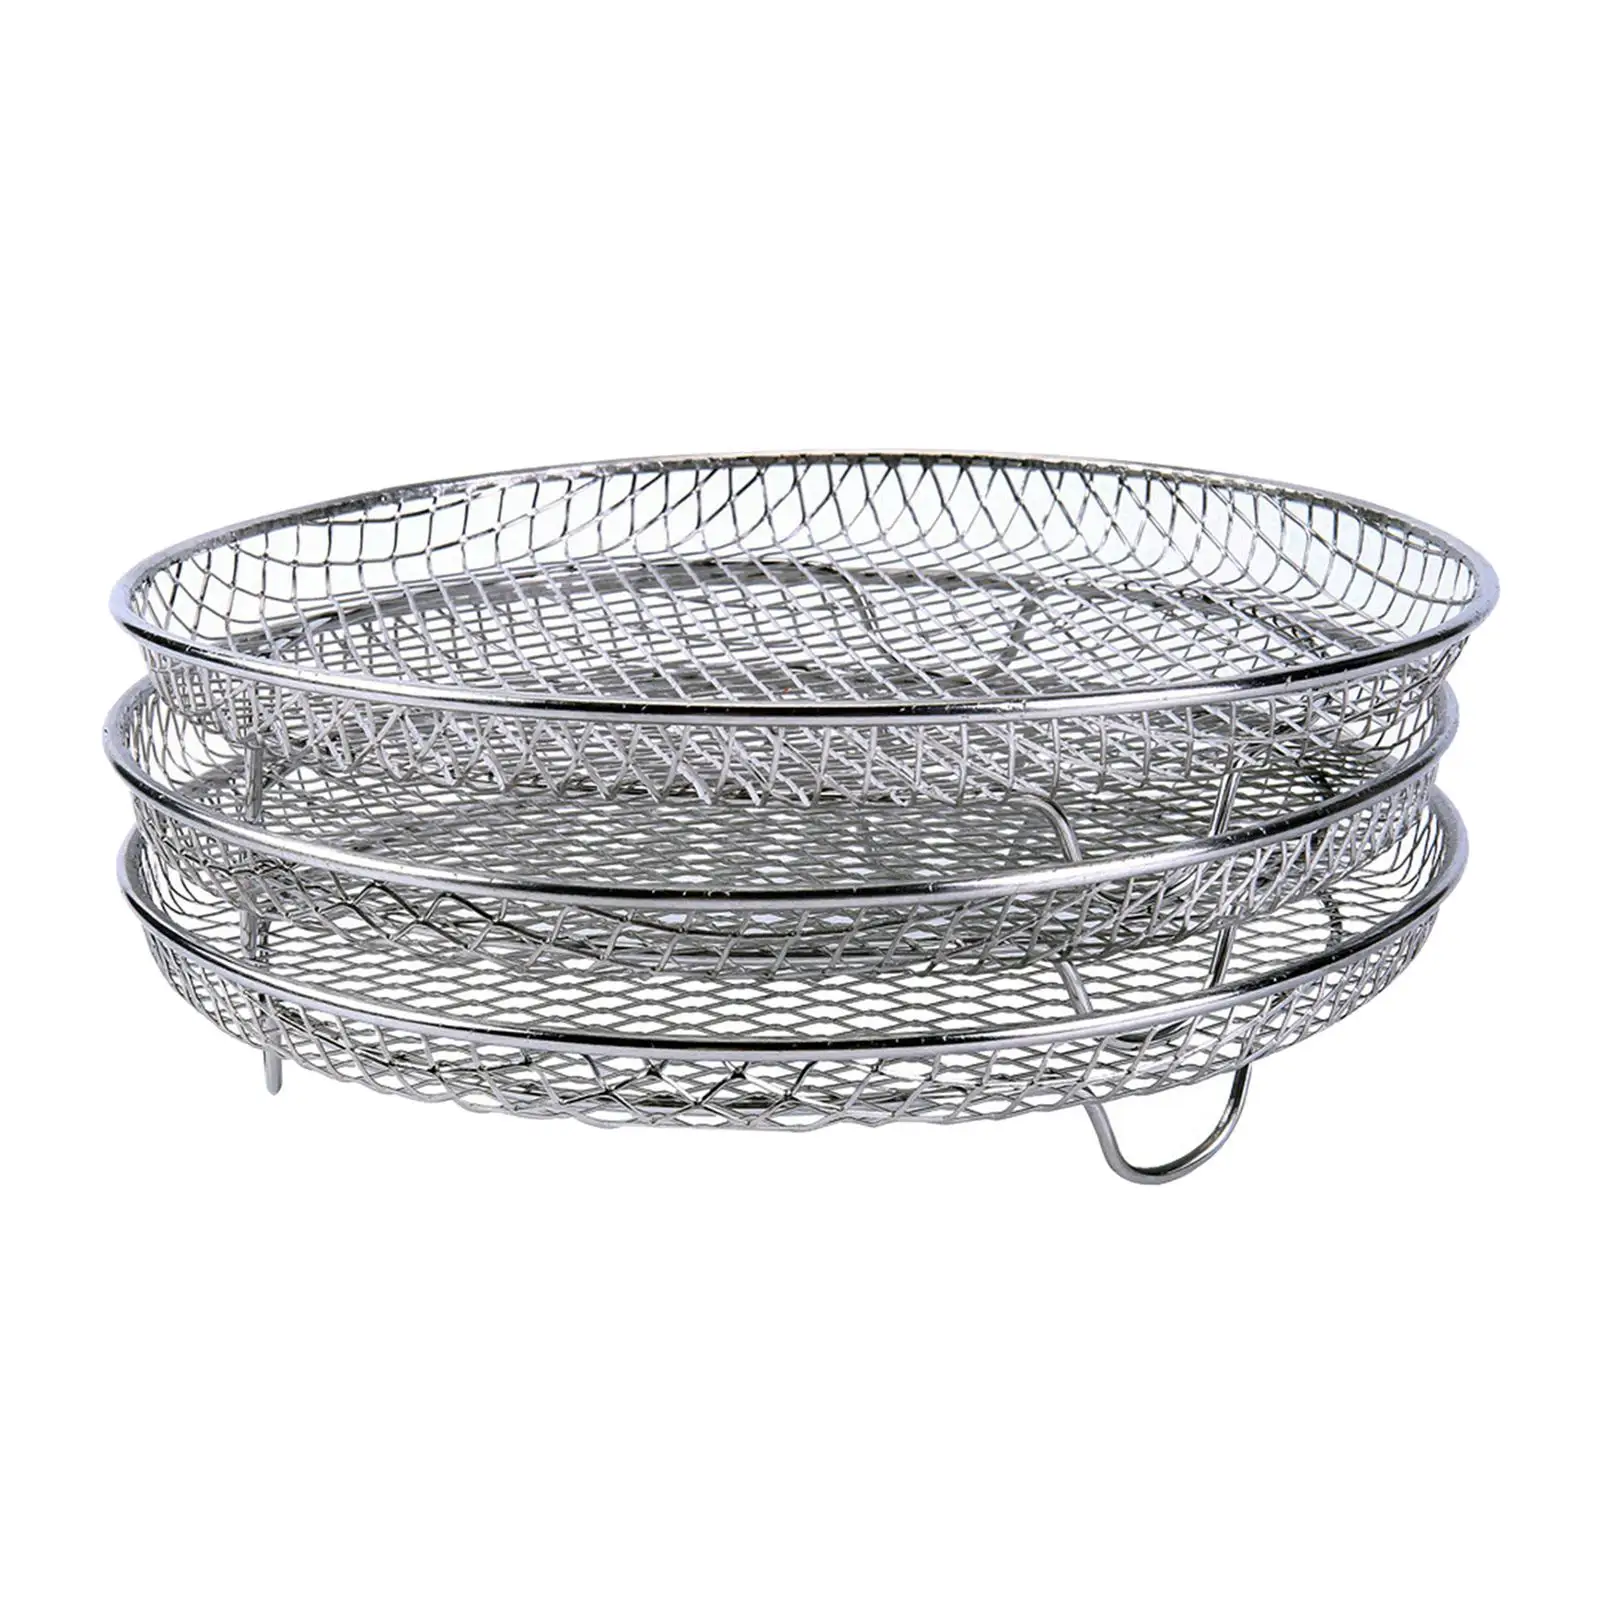   Stand Save Space Stackable Stainless Steel Dehydrating Rack for Instant   Beef Jerky